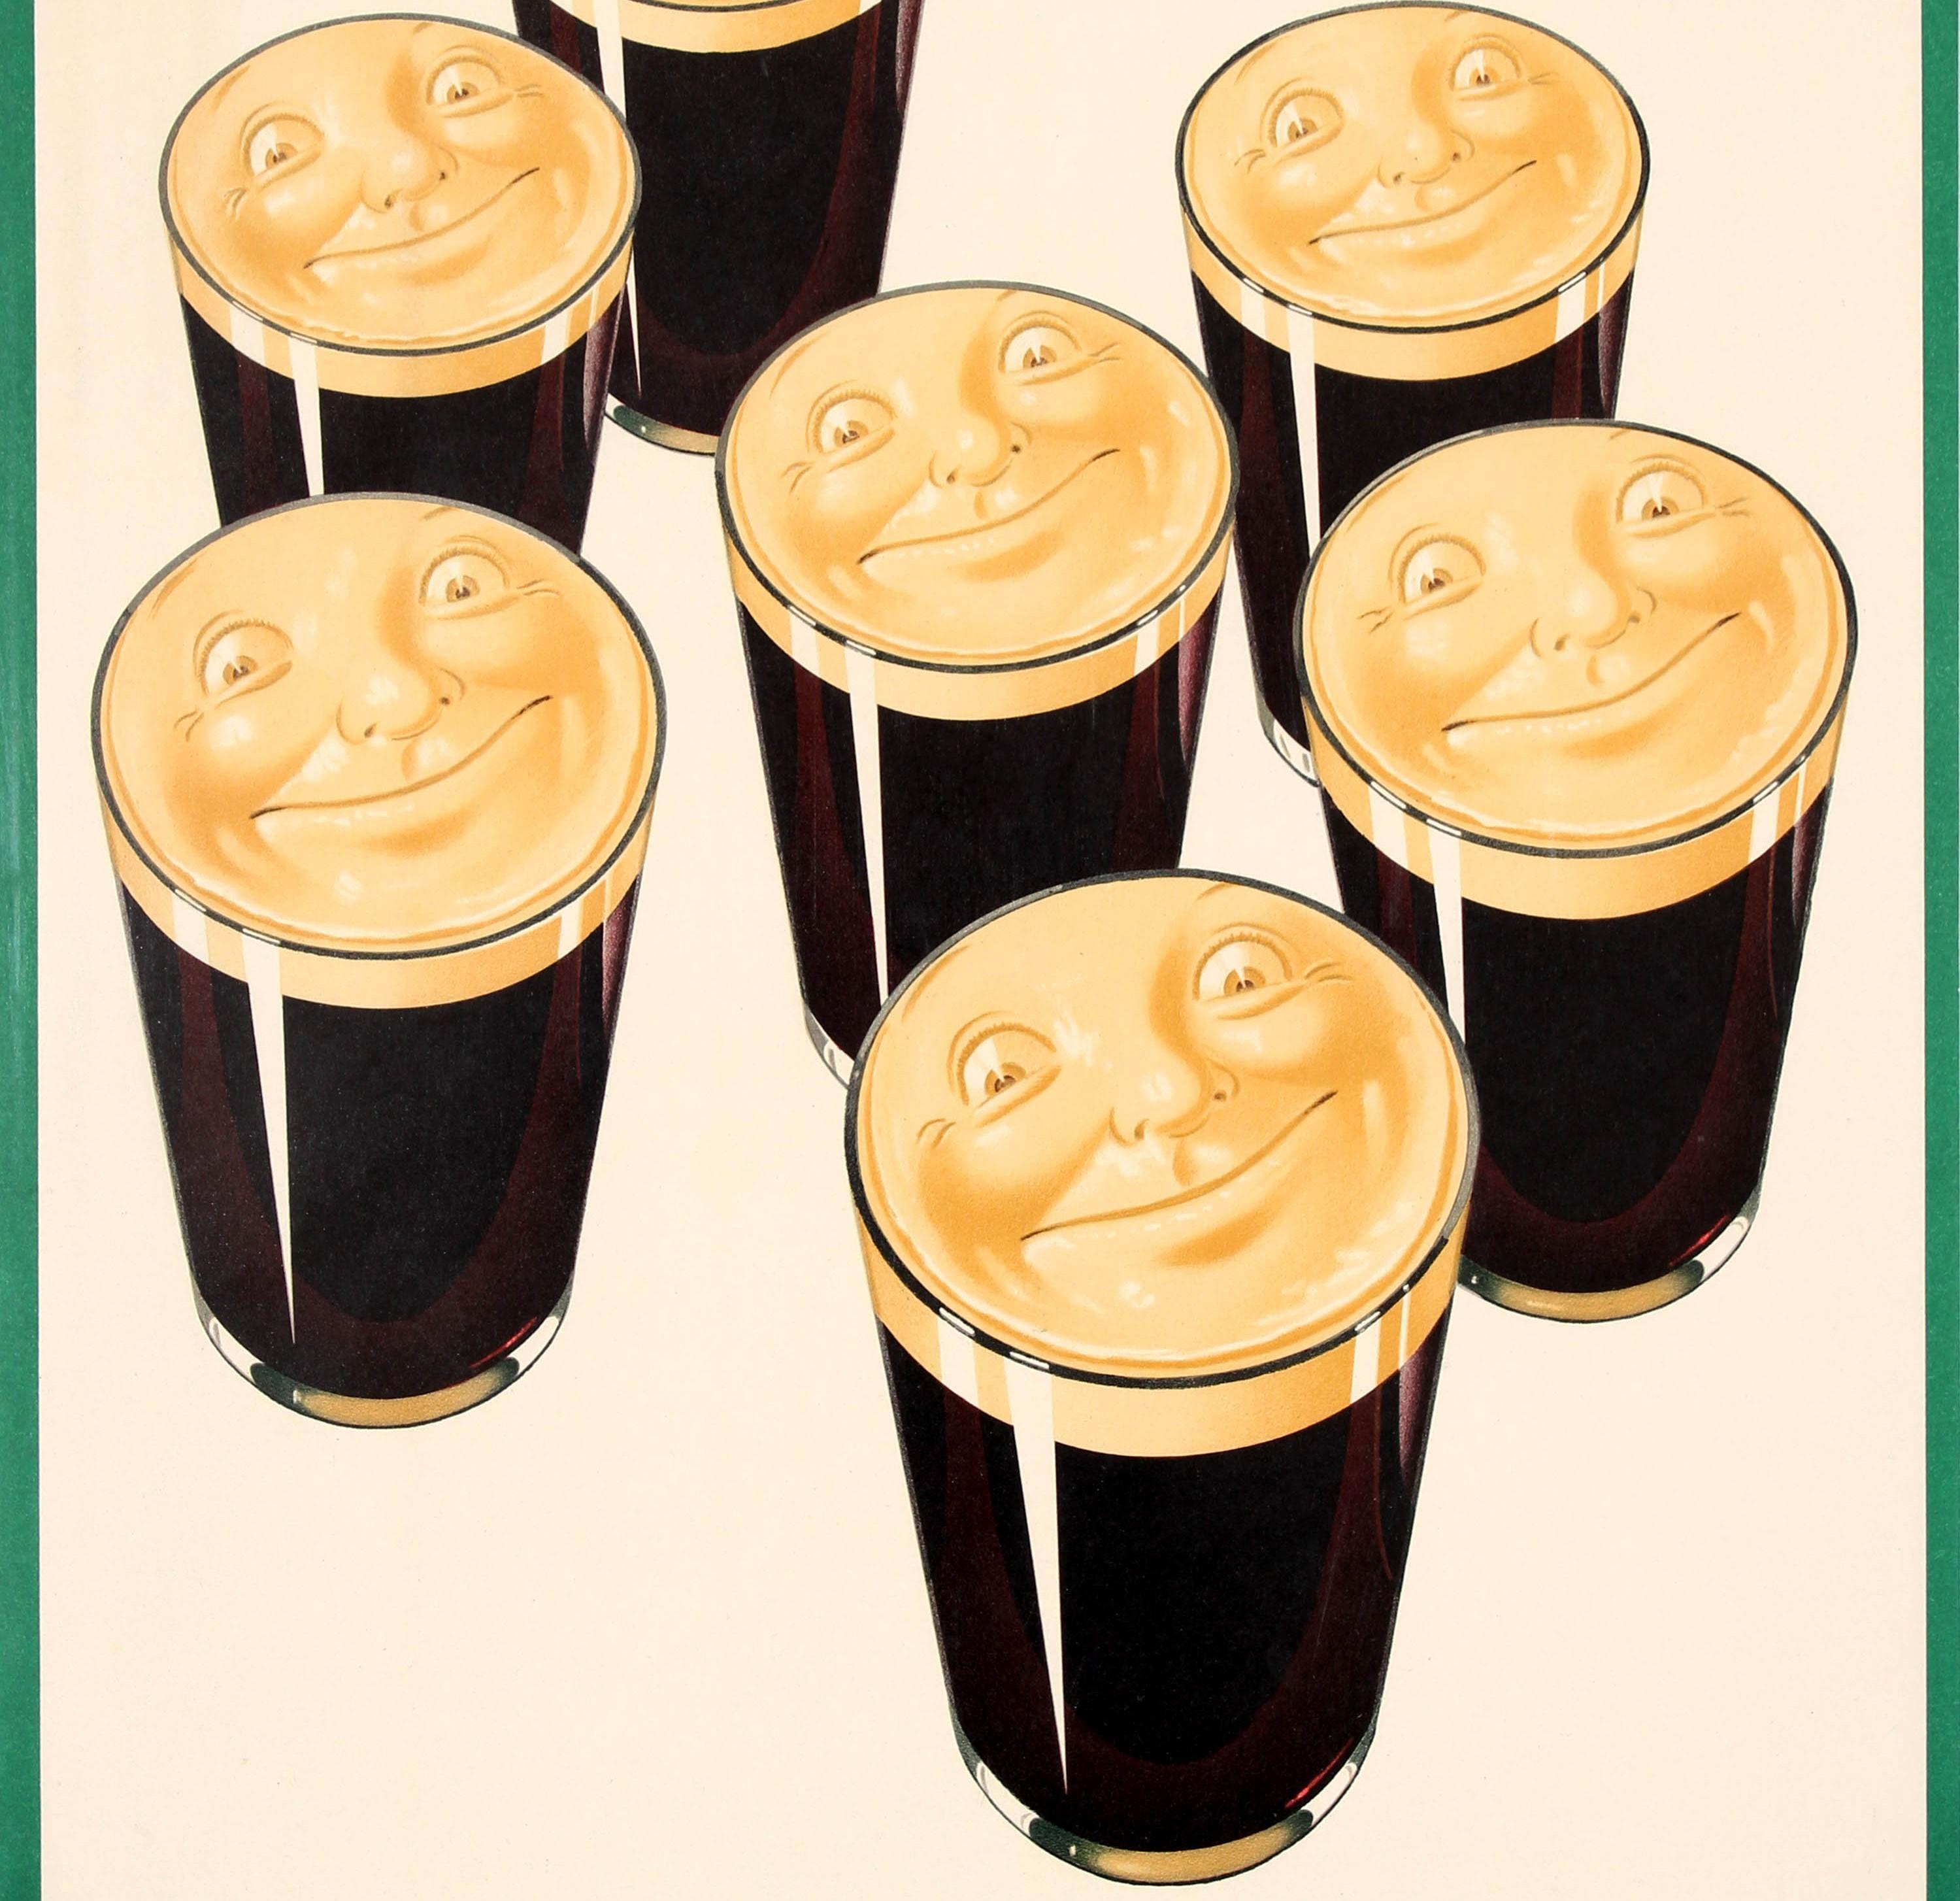 guinness is good for you advert